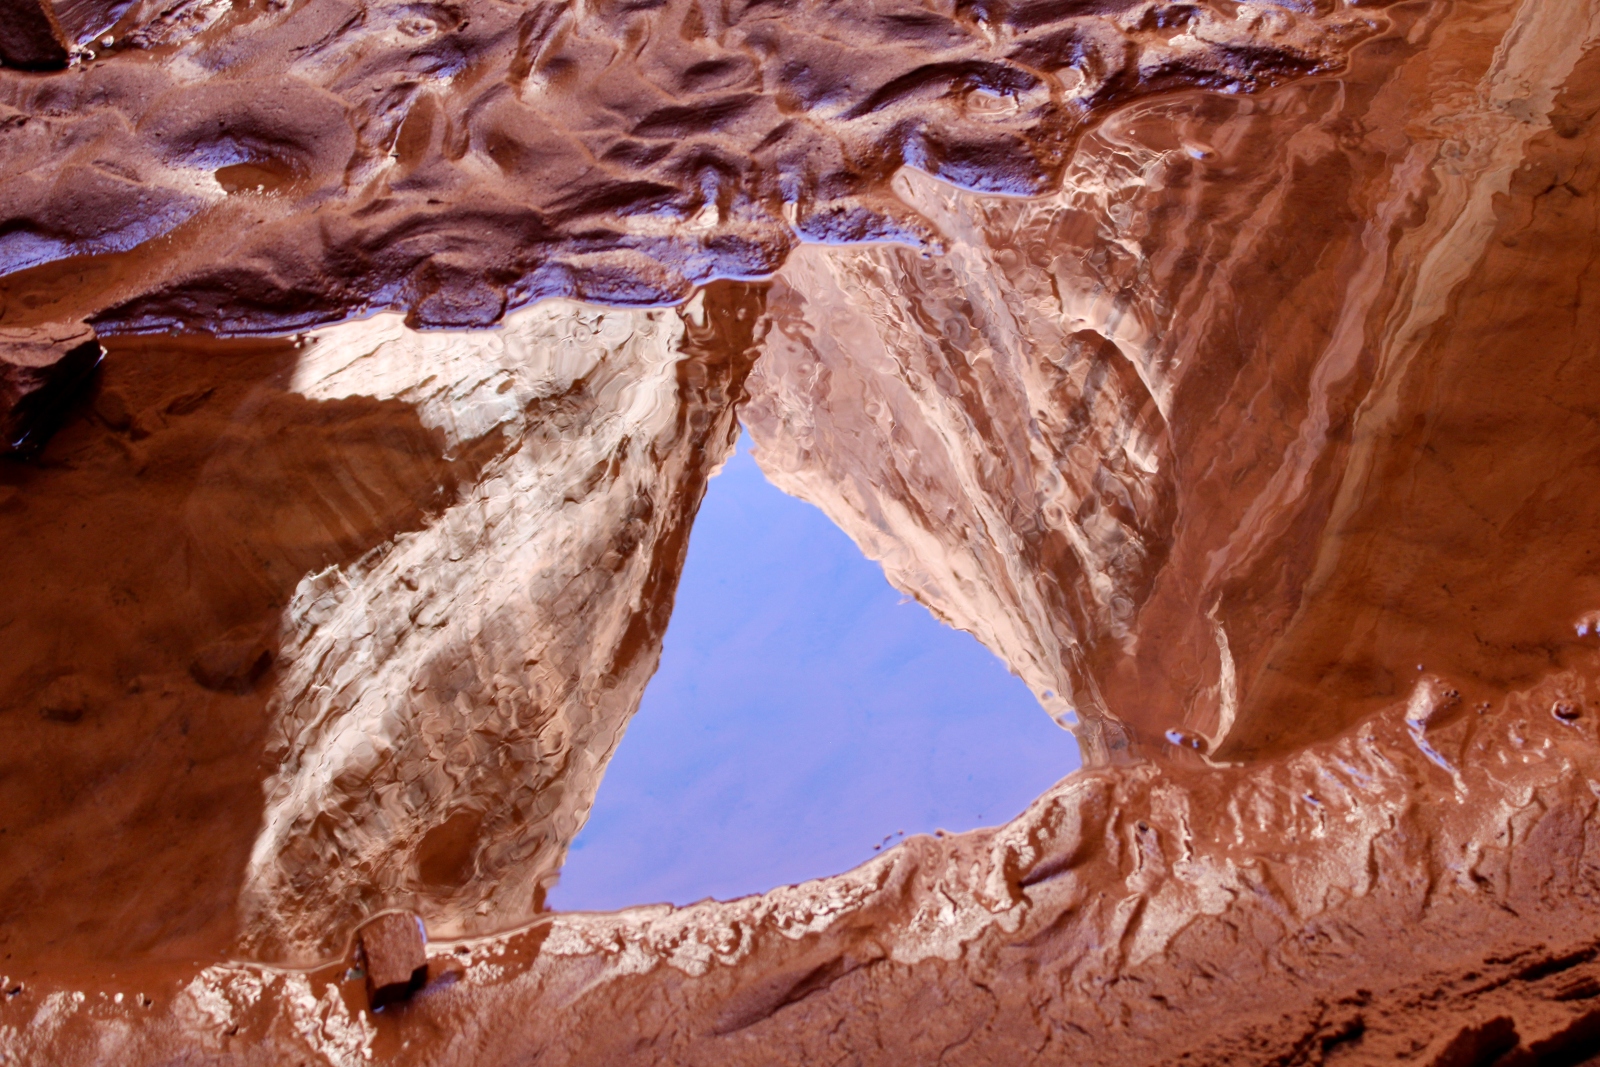 A pool of water in red mud reflects the red canyon walls above.